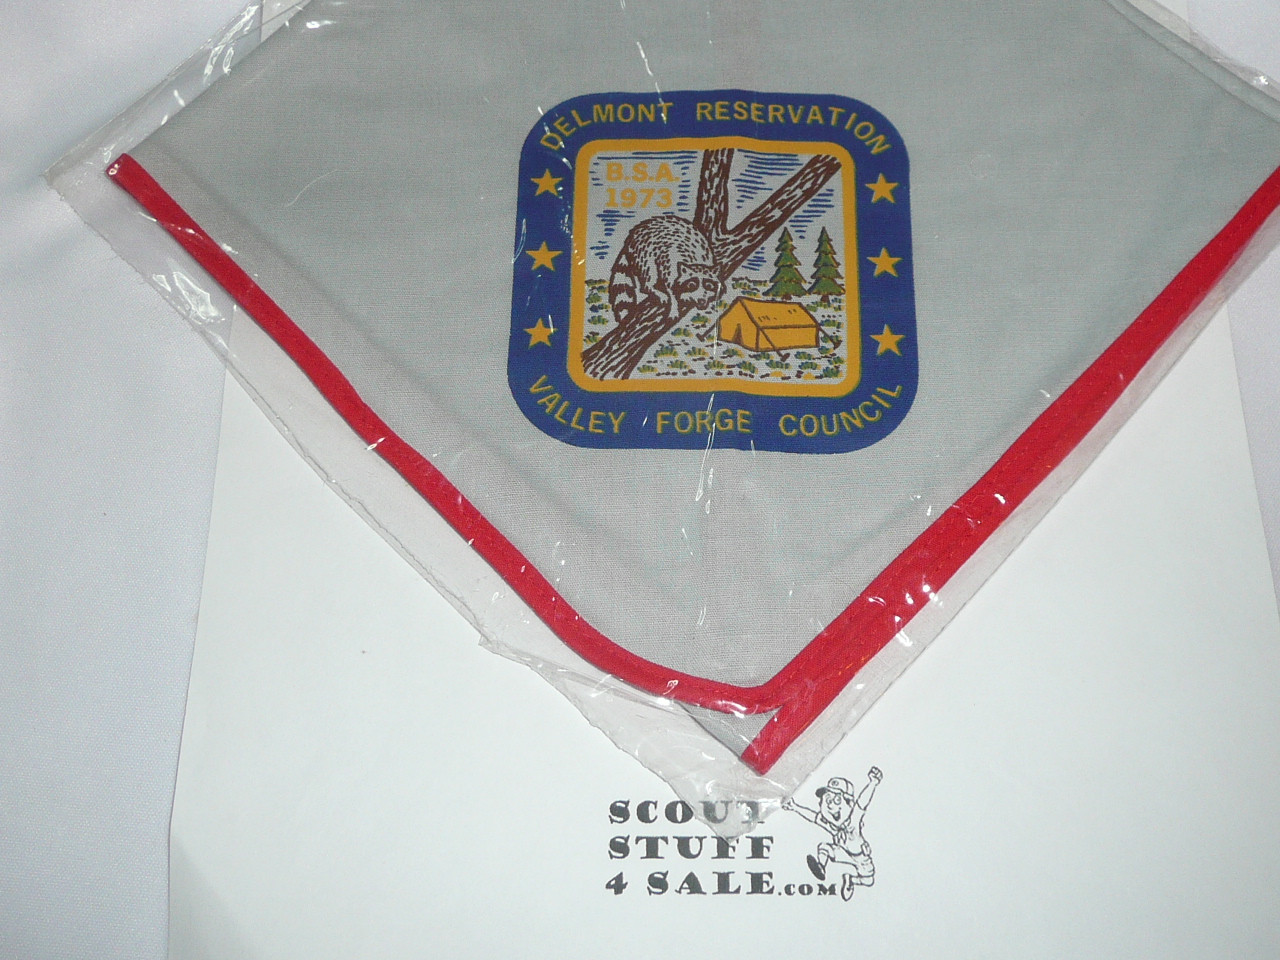 Delmont Scout Reservation Neckerchief, Valley Forge Council, 1973